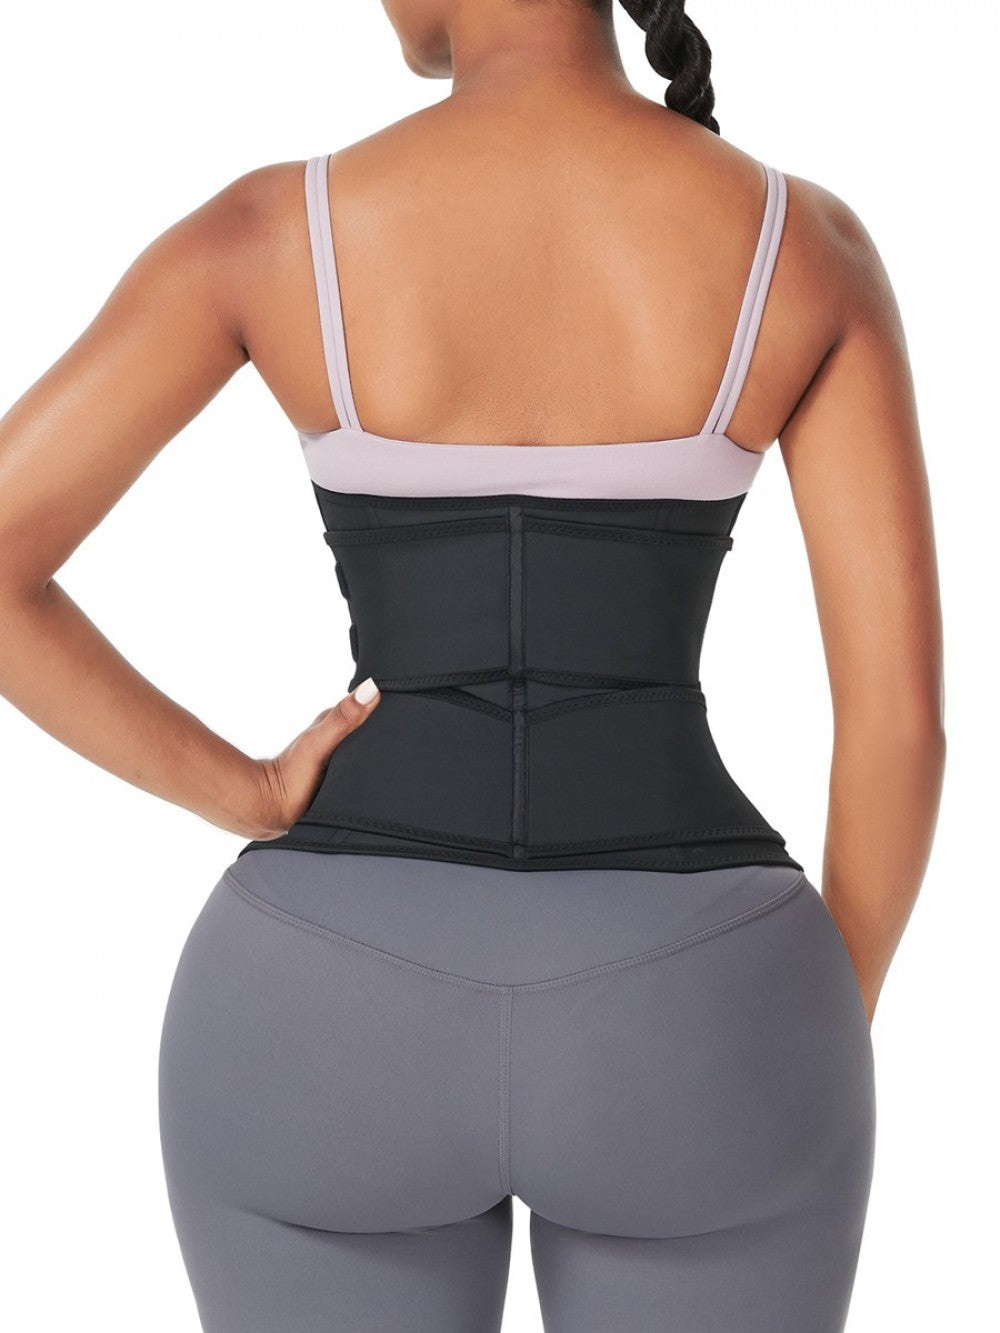 Latex Hourglass Waist Cincher Corset Trimmer Belt For Women Adjustable Tight  Compression Double Layer Band For Belly Control And Body Shaping From  Langqingxuan, $13.21